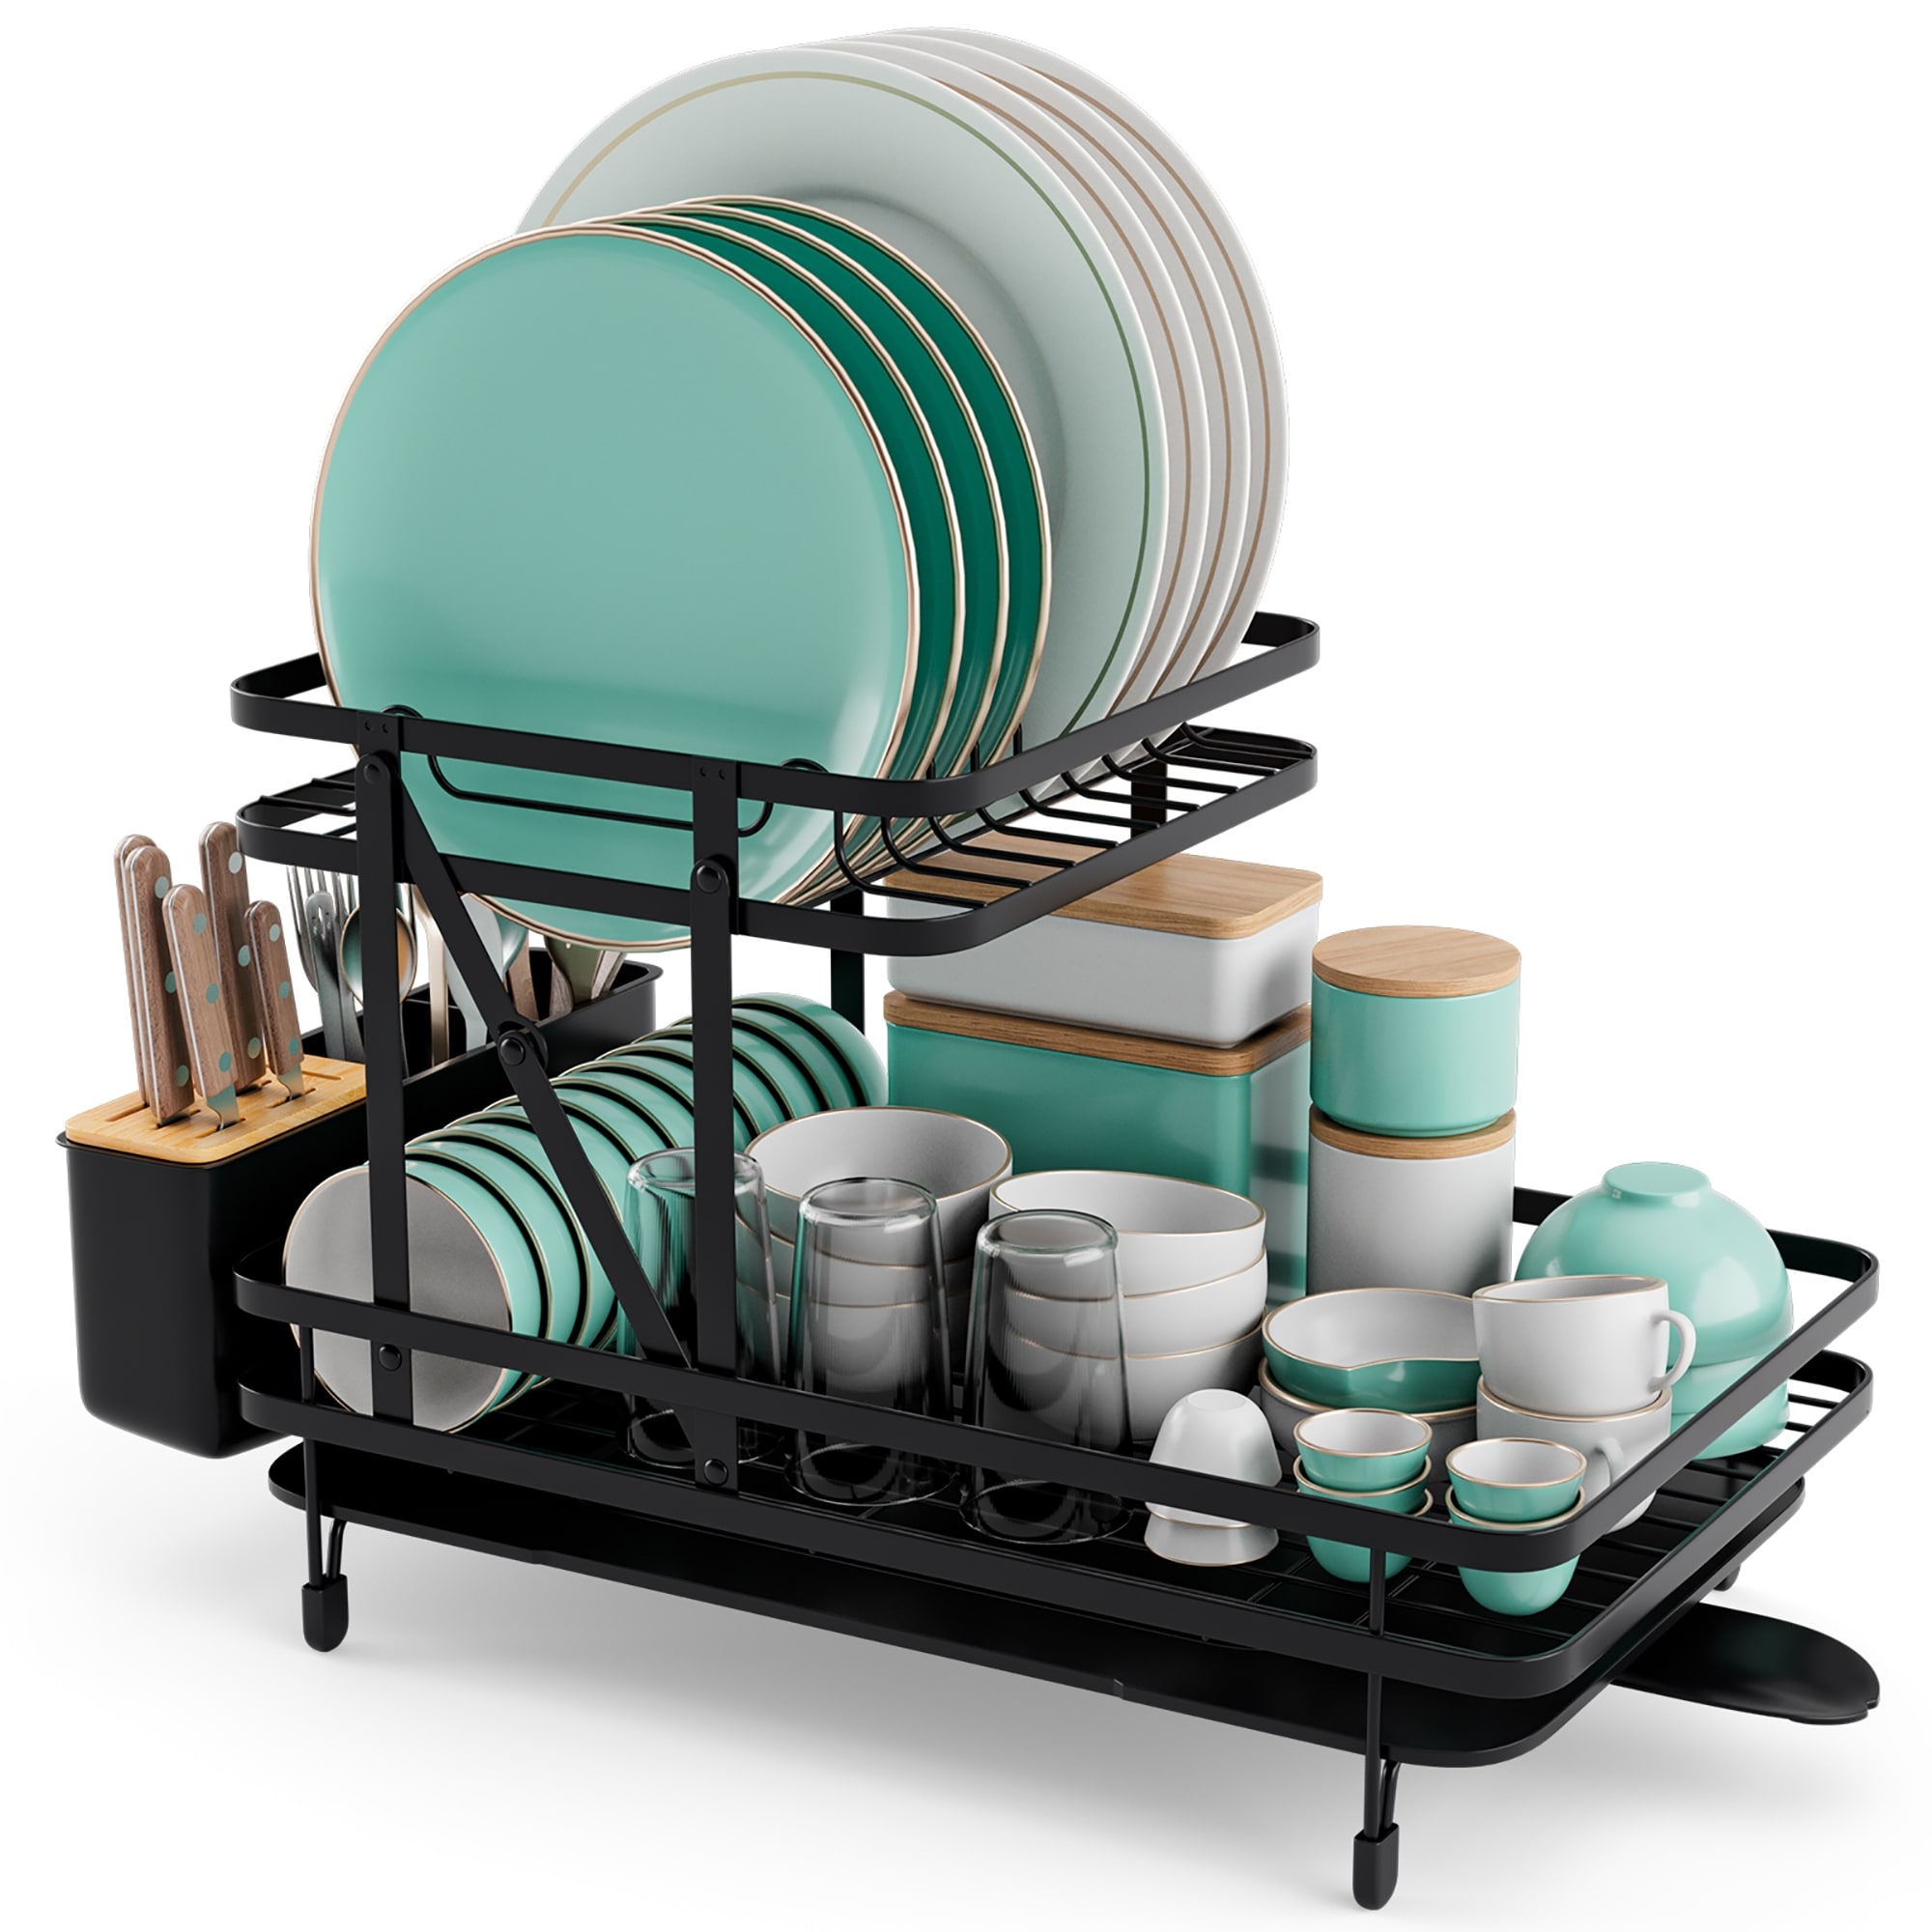 https://ak1.ostkcdn.com/images/products/is/images/direct/a7cac0bc46b291e7b602d438415e3031531fe1dd/Costway-Dish-Drying-Rack-Collapsible-2-Tier-Dish-Rack-and-Drainboard.jpg